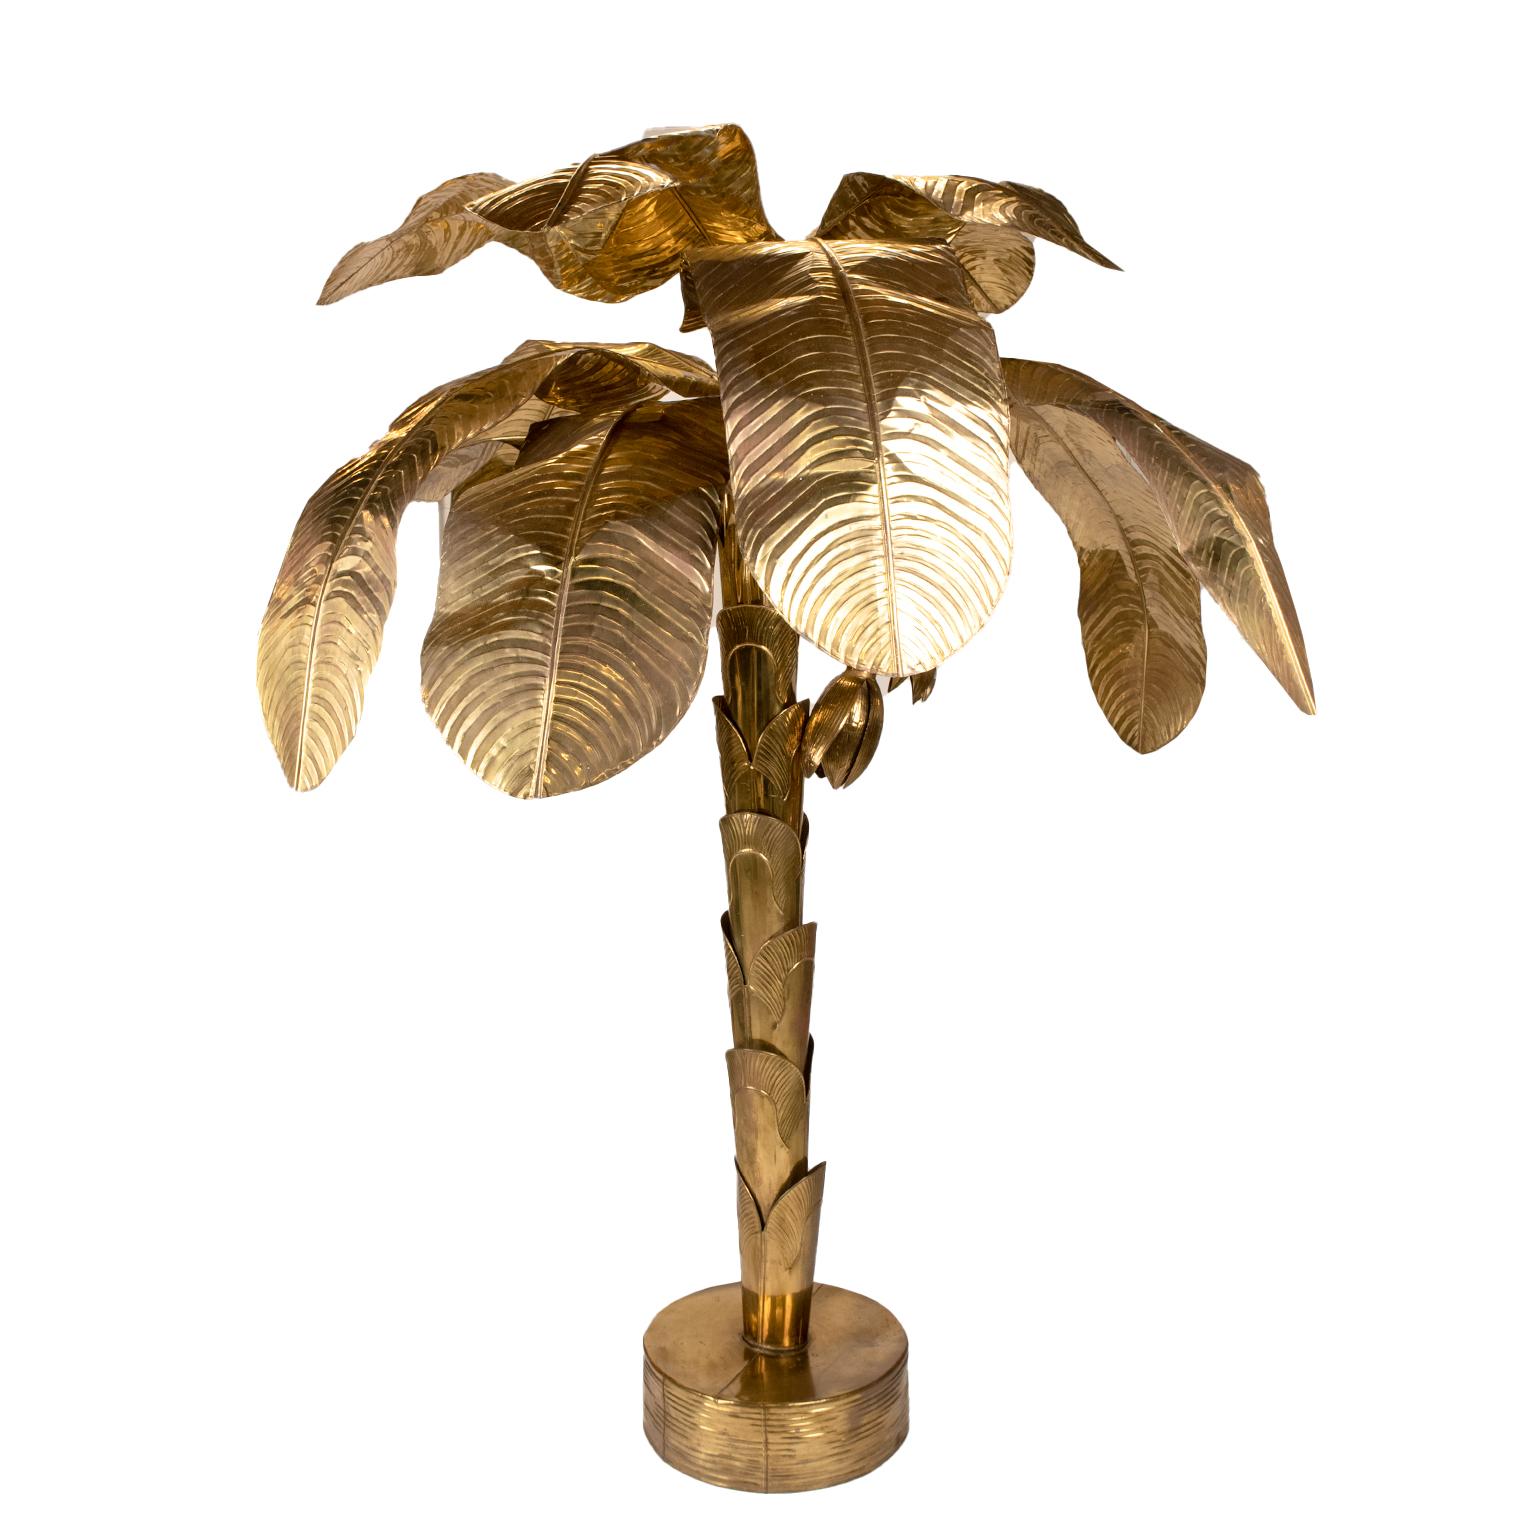 This is a stunning large aged lacquered brass palm banana tree sculpture with removable leaves surrounding a central weighted brass trunk.